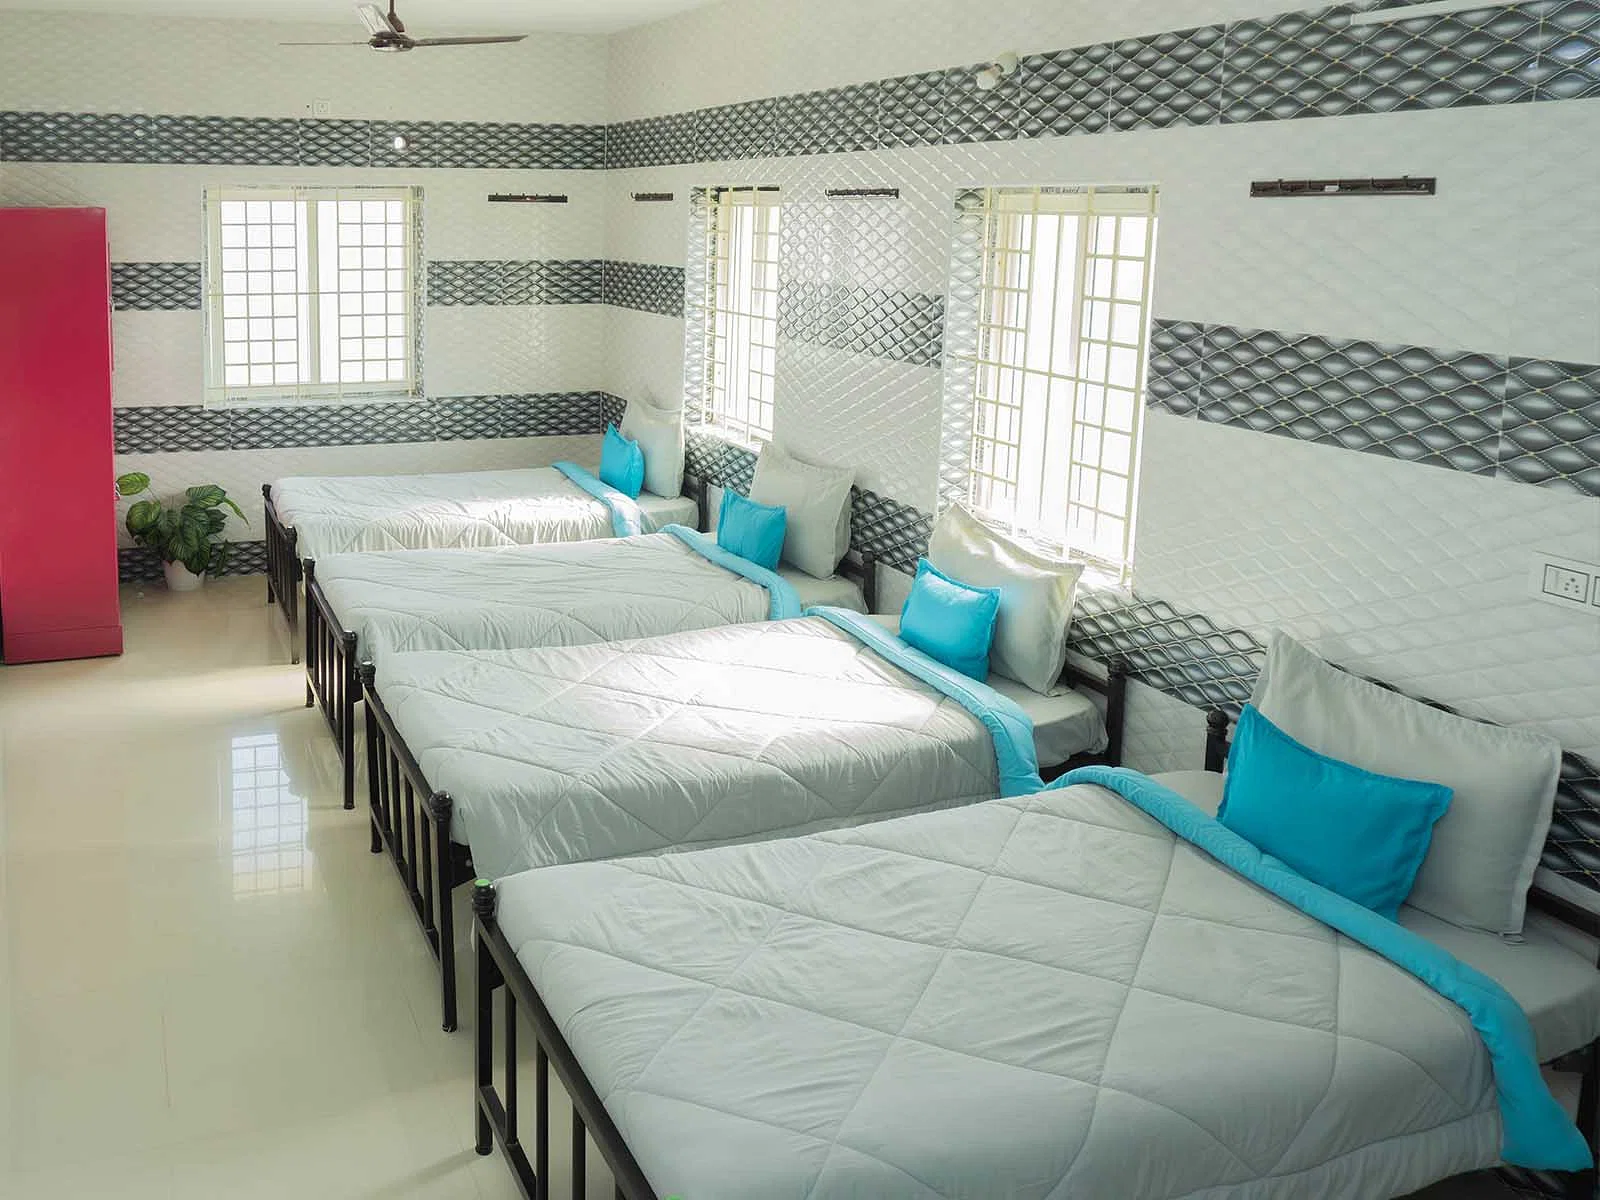 budget-friendly PGs and hostels for boys and girls with single rooms with daily hopusekeeping-Zolo Epicurean Enclave